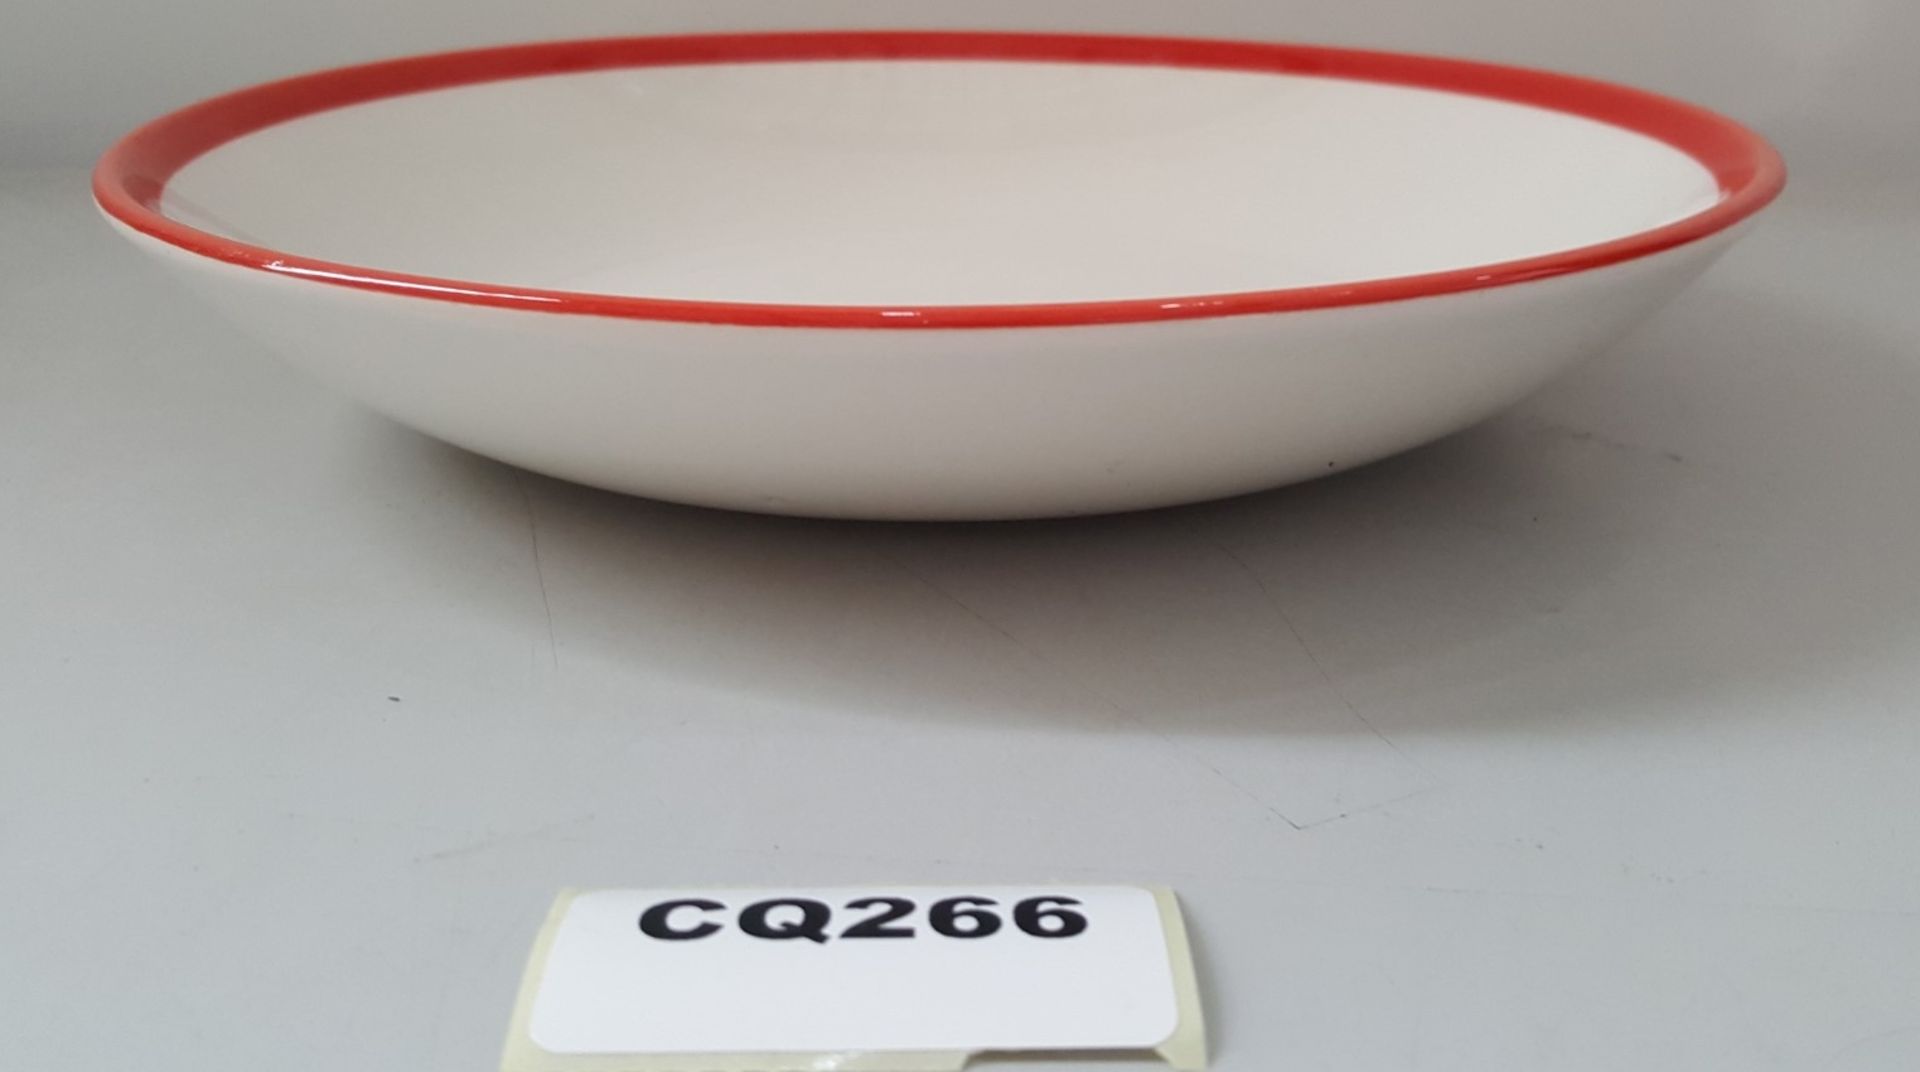 18 x Steelite Coupe Bowls White With Red Outline Egde 25CM - Ref CQ266 - Image 4 of 5